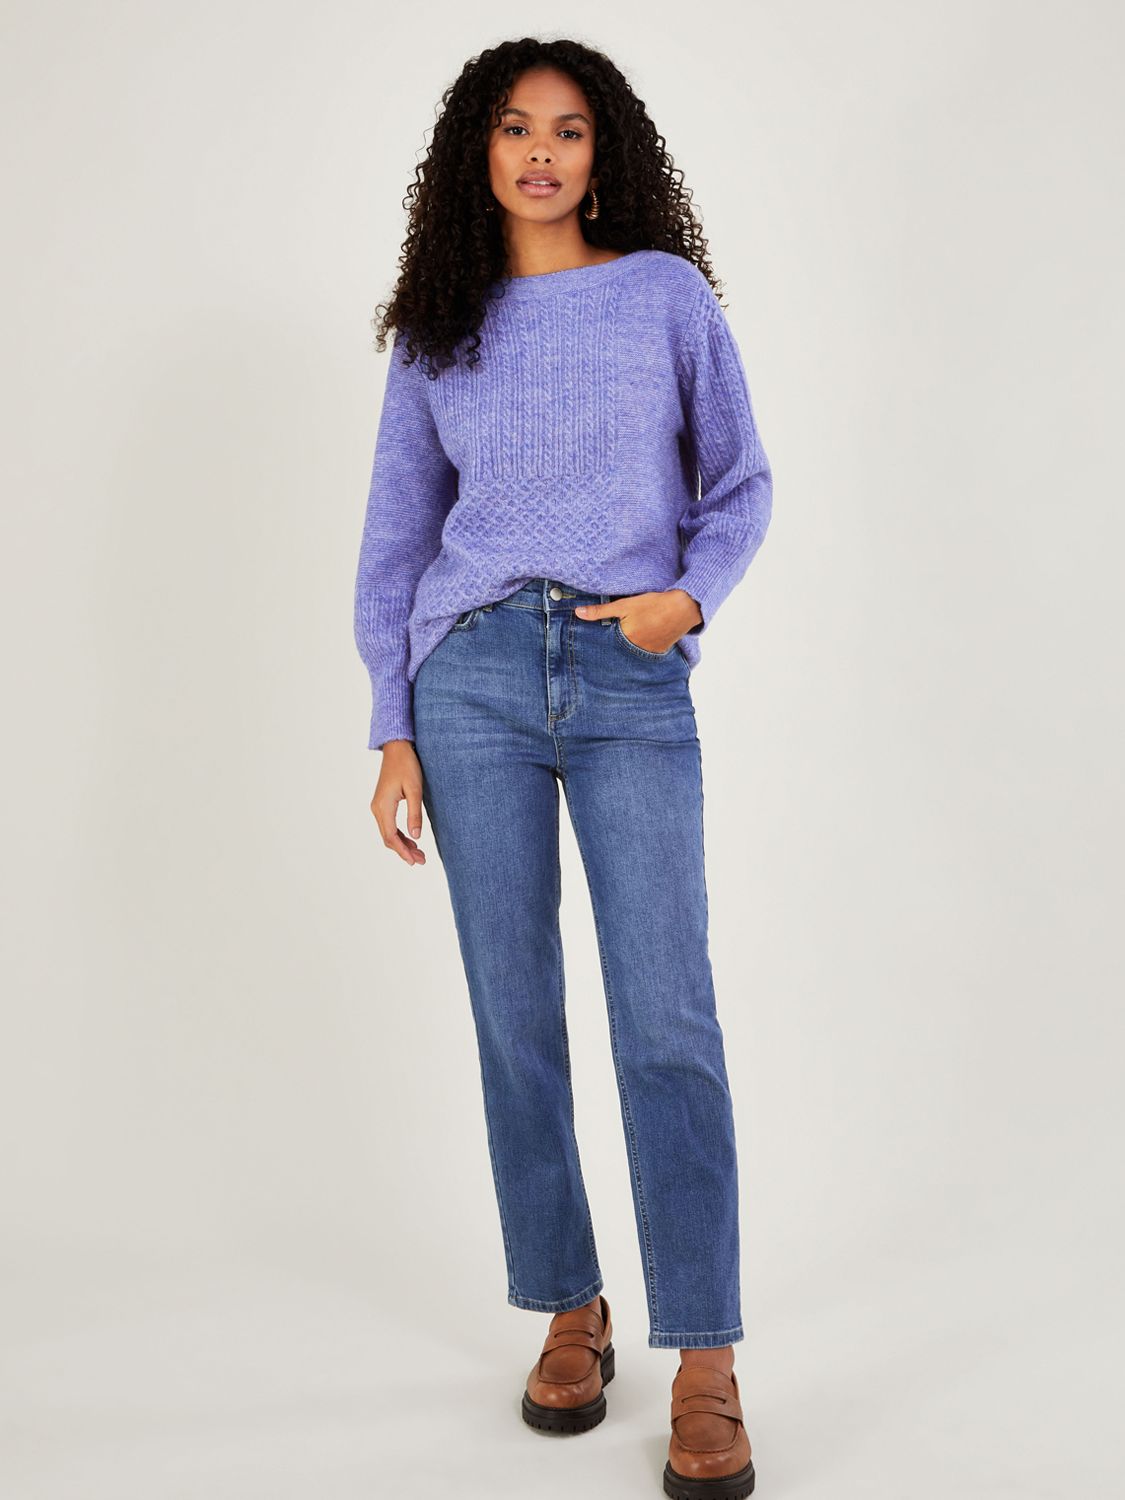 Monsoon Supersoft Patch Stitch Tunic Jumper, Blue at John Lewis & Partners